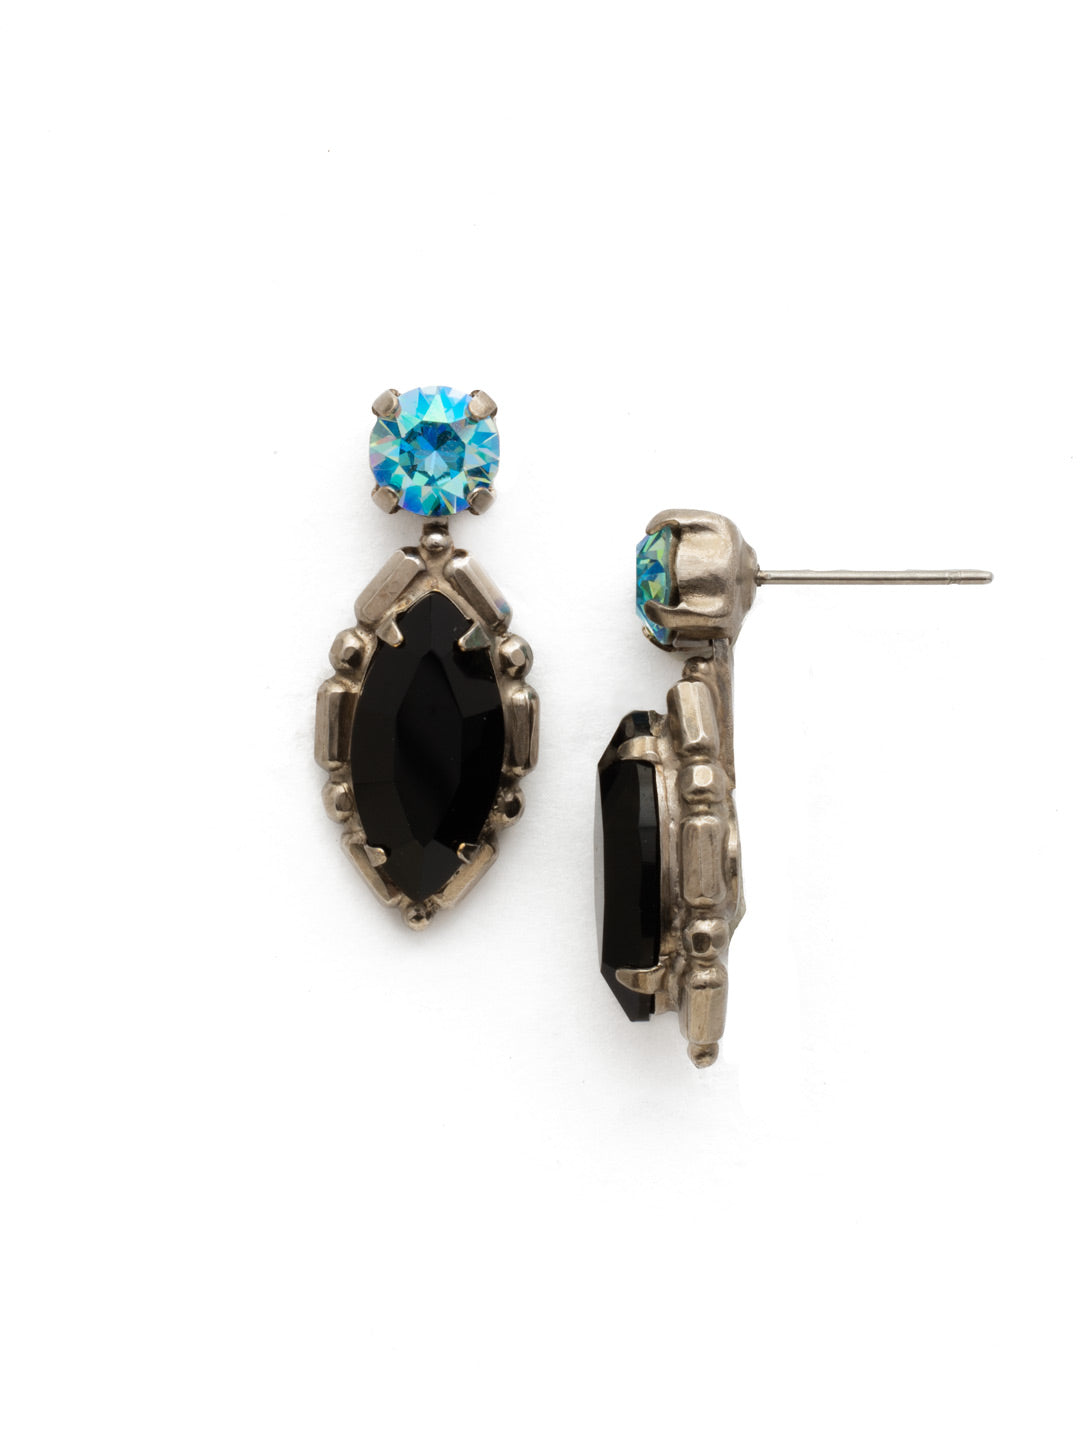 Cardoon Dangle Earrings - EDX7ASBLT - <p>A navette stone in a detailed setting hangs from a round crystal to create this beautiful dangle earring. From Sorrelli's Black Tie collection in our Antique Silver-tone finish.</p>